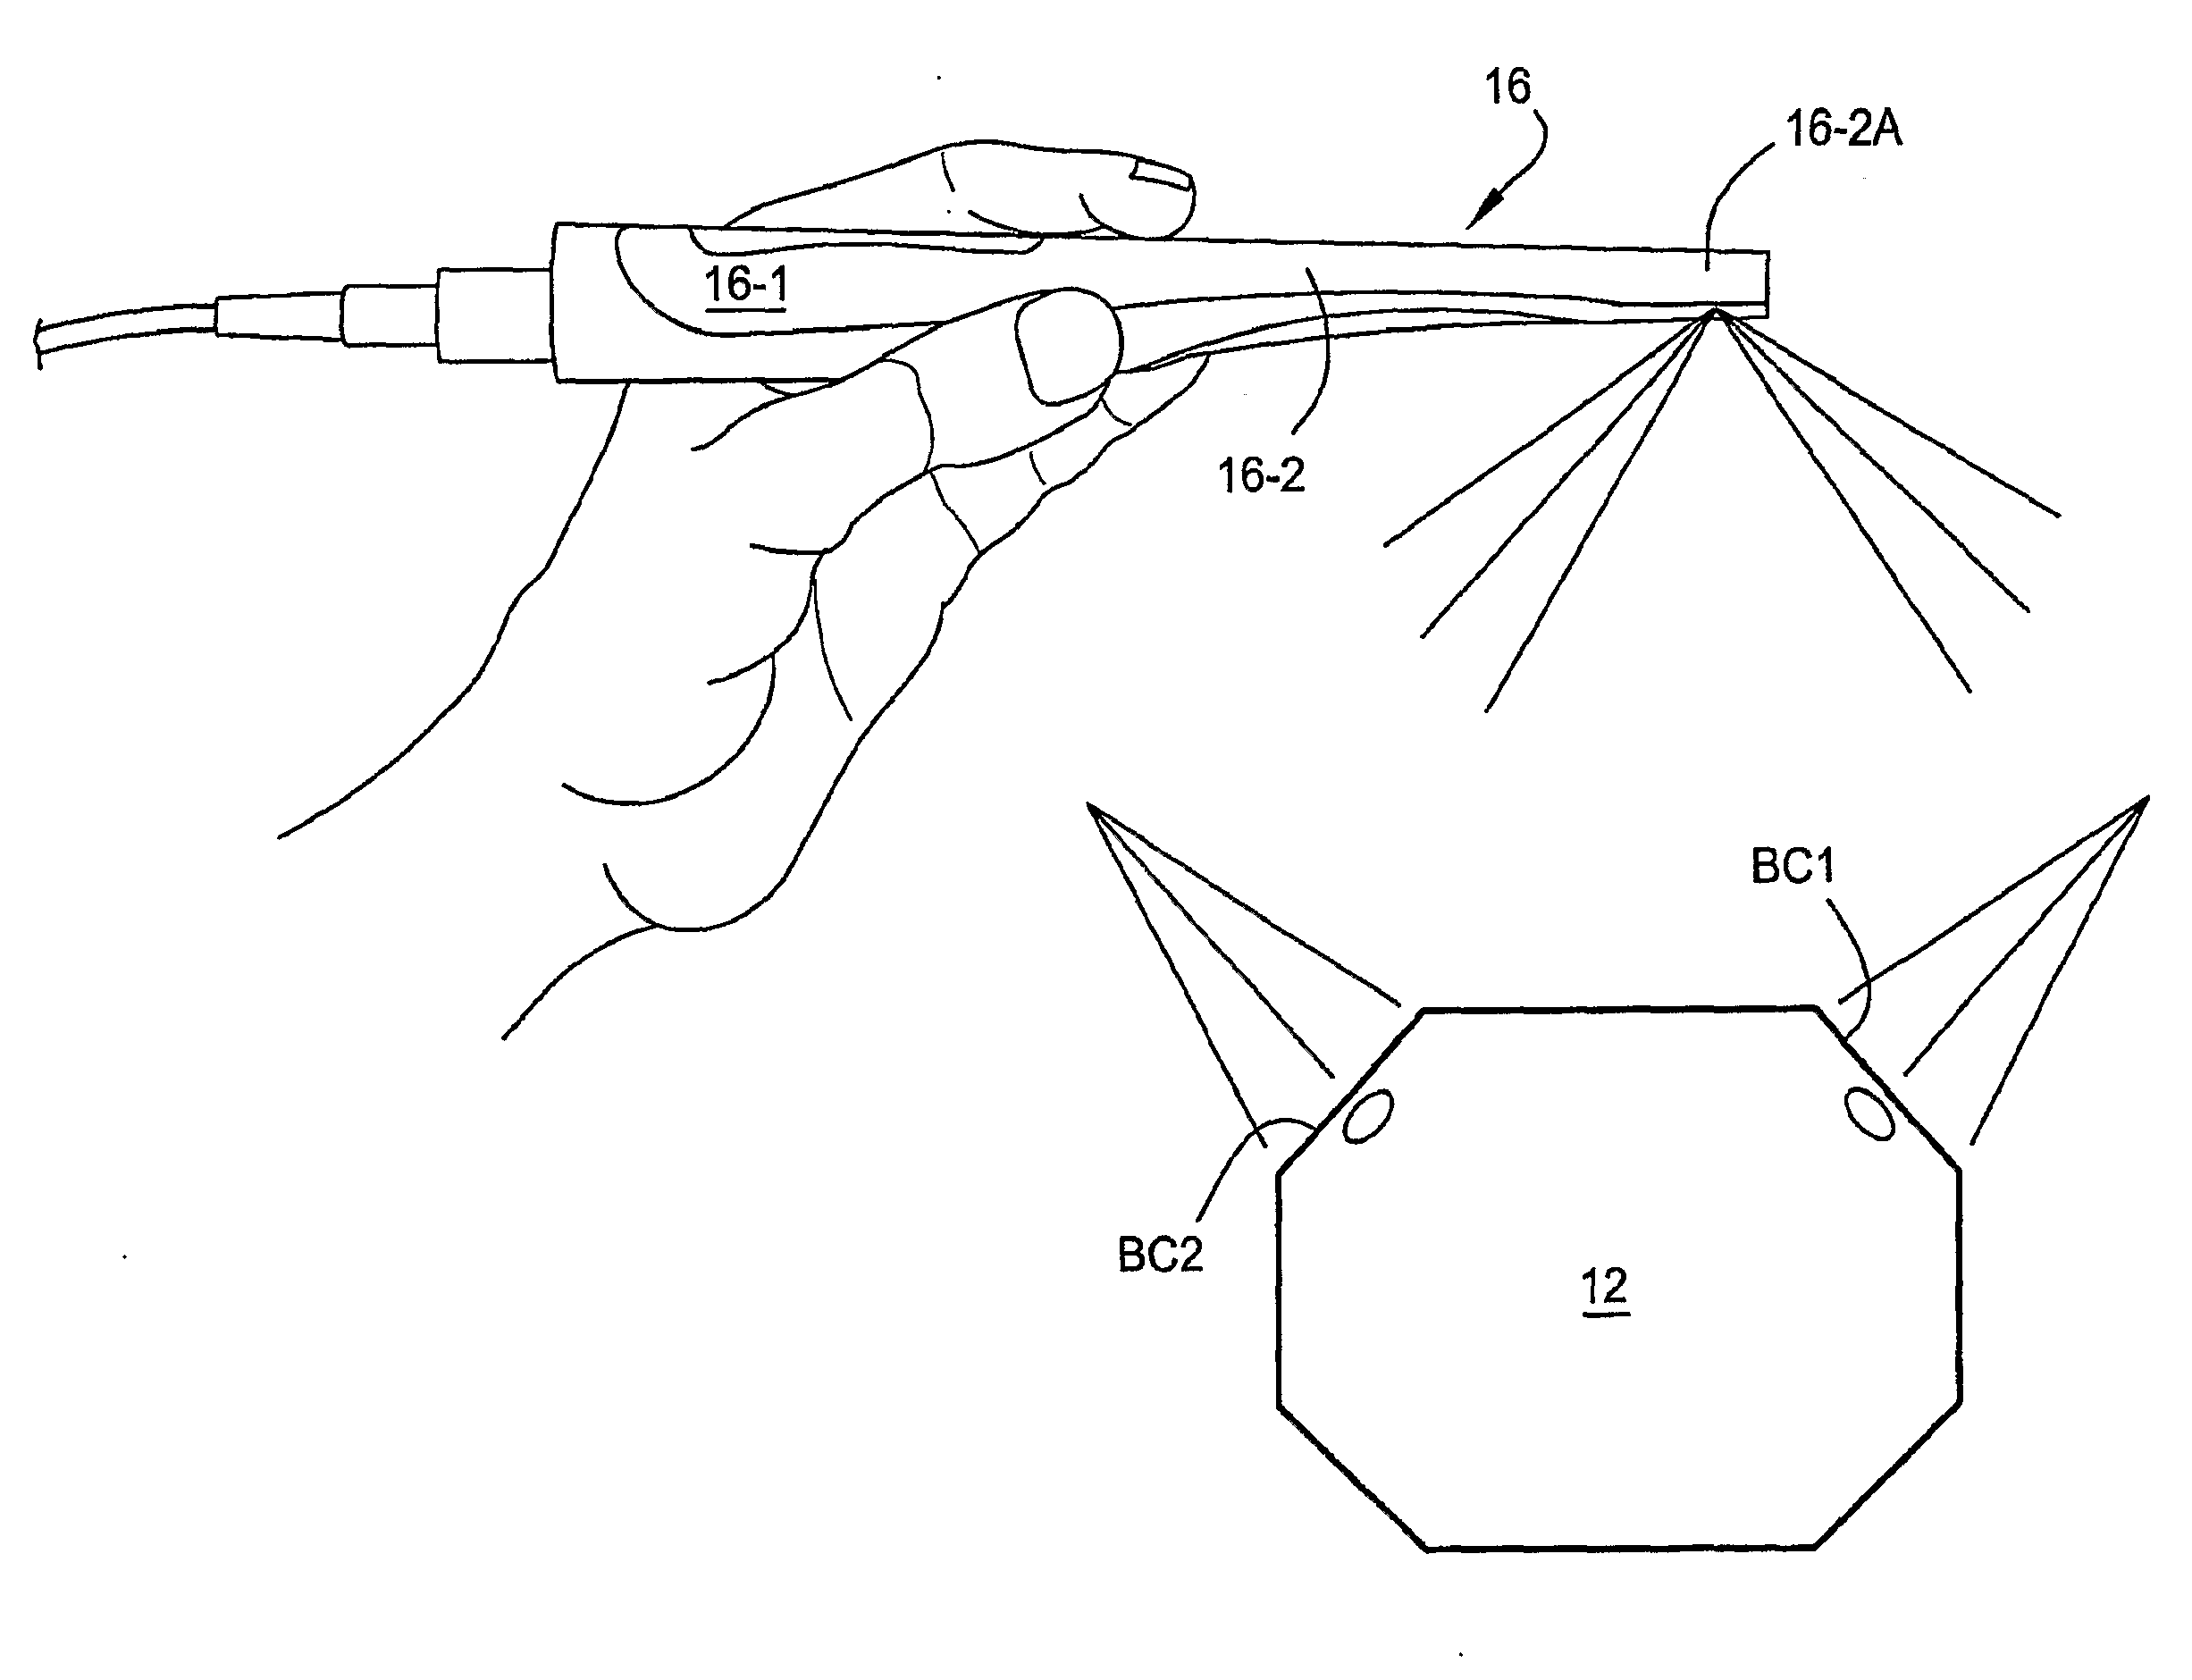 Force-responsive orthodontic brackets and systems and methods which use the same